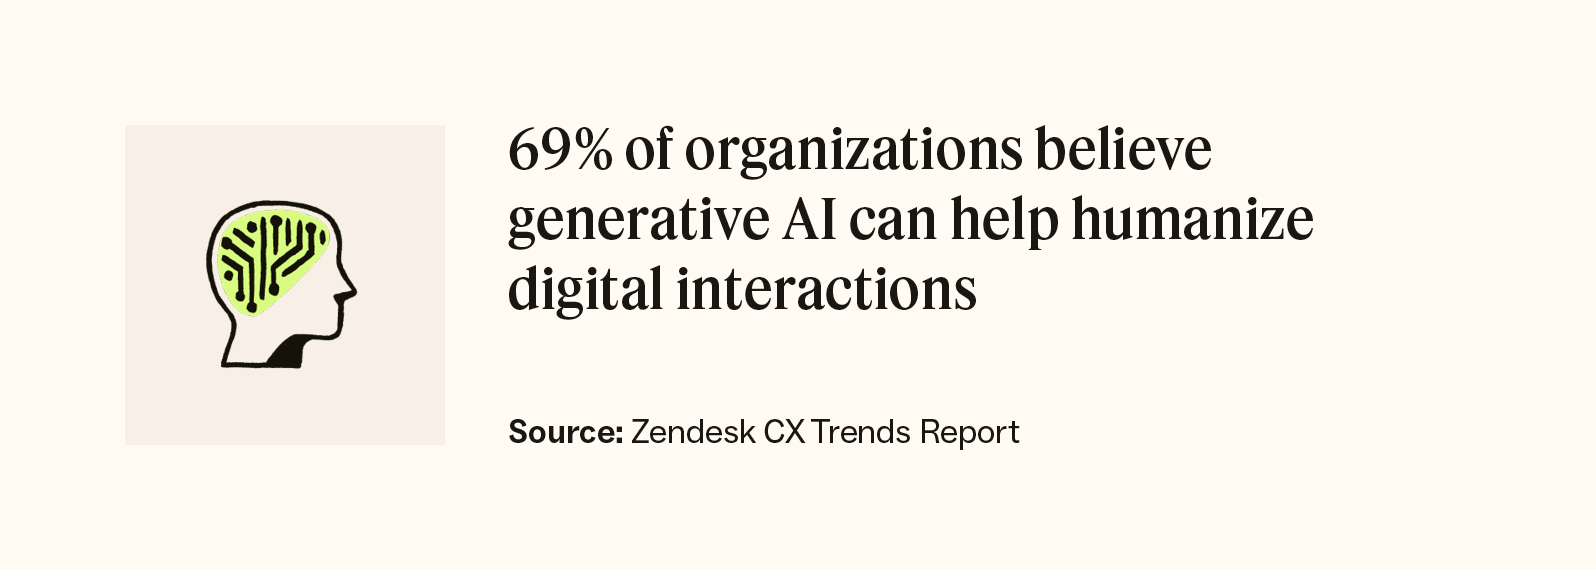 A graphic states that 69 percent of organizations believe generative AI can help humanize digital interactions, according to the Zendesk CX Trends Report.